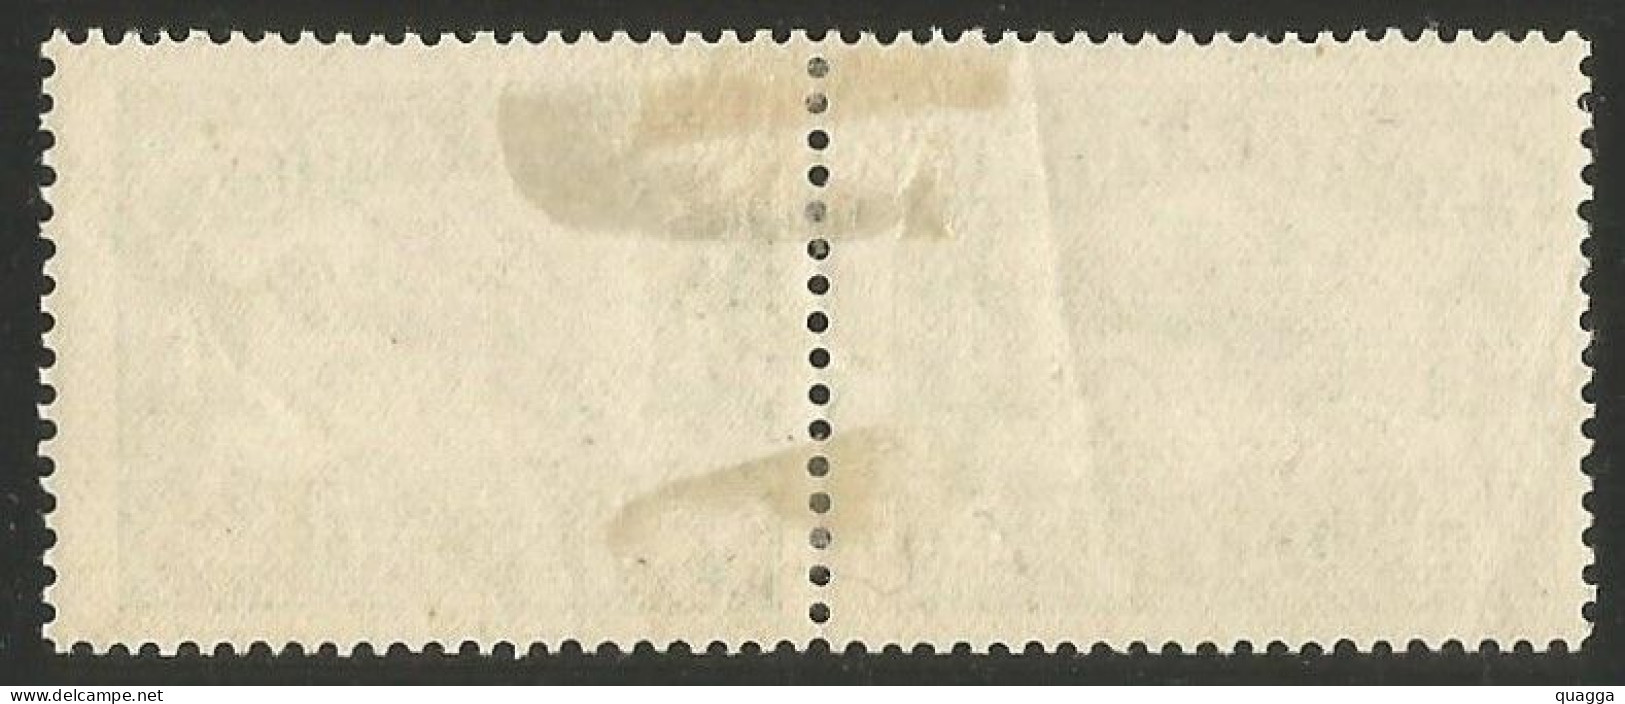 South Africa 1929. 4d Green Showing Short 'I' In 'AIR'. (UHB 20 V2). SACC 40*, SG 40*. - Ungebraucht